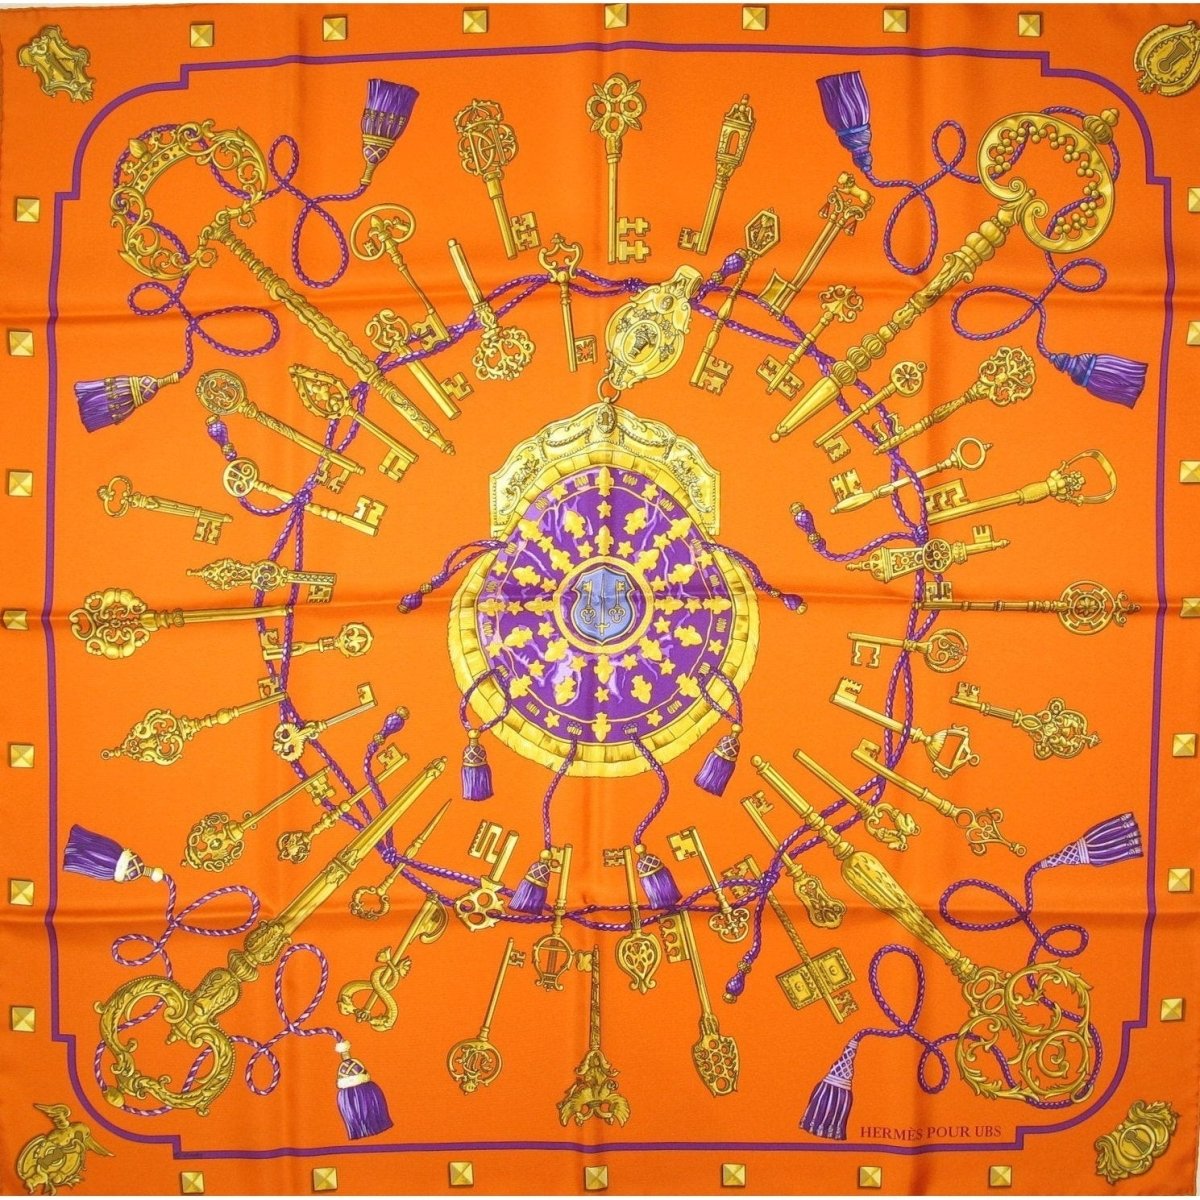 Hermes for UBS Orange/Orange Les Cles Exclusive Limited Twill scarf NIB ...